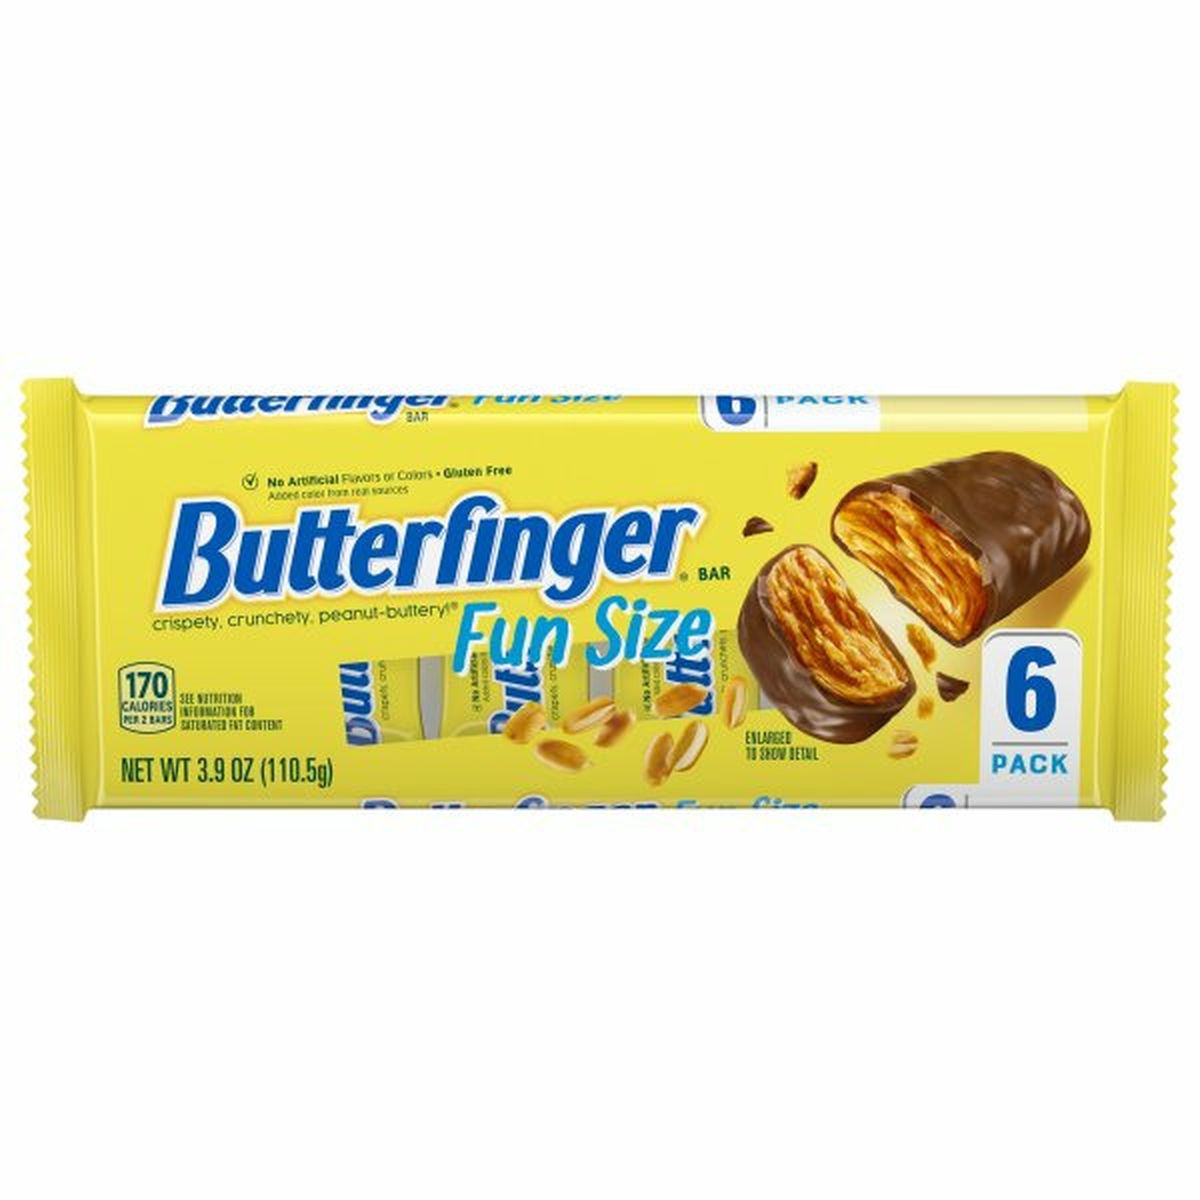 Calories in Butterfinger Candy Bar, Fun Size, 6 Pack